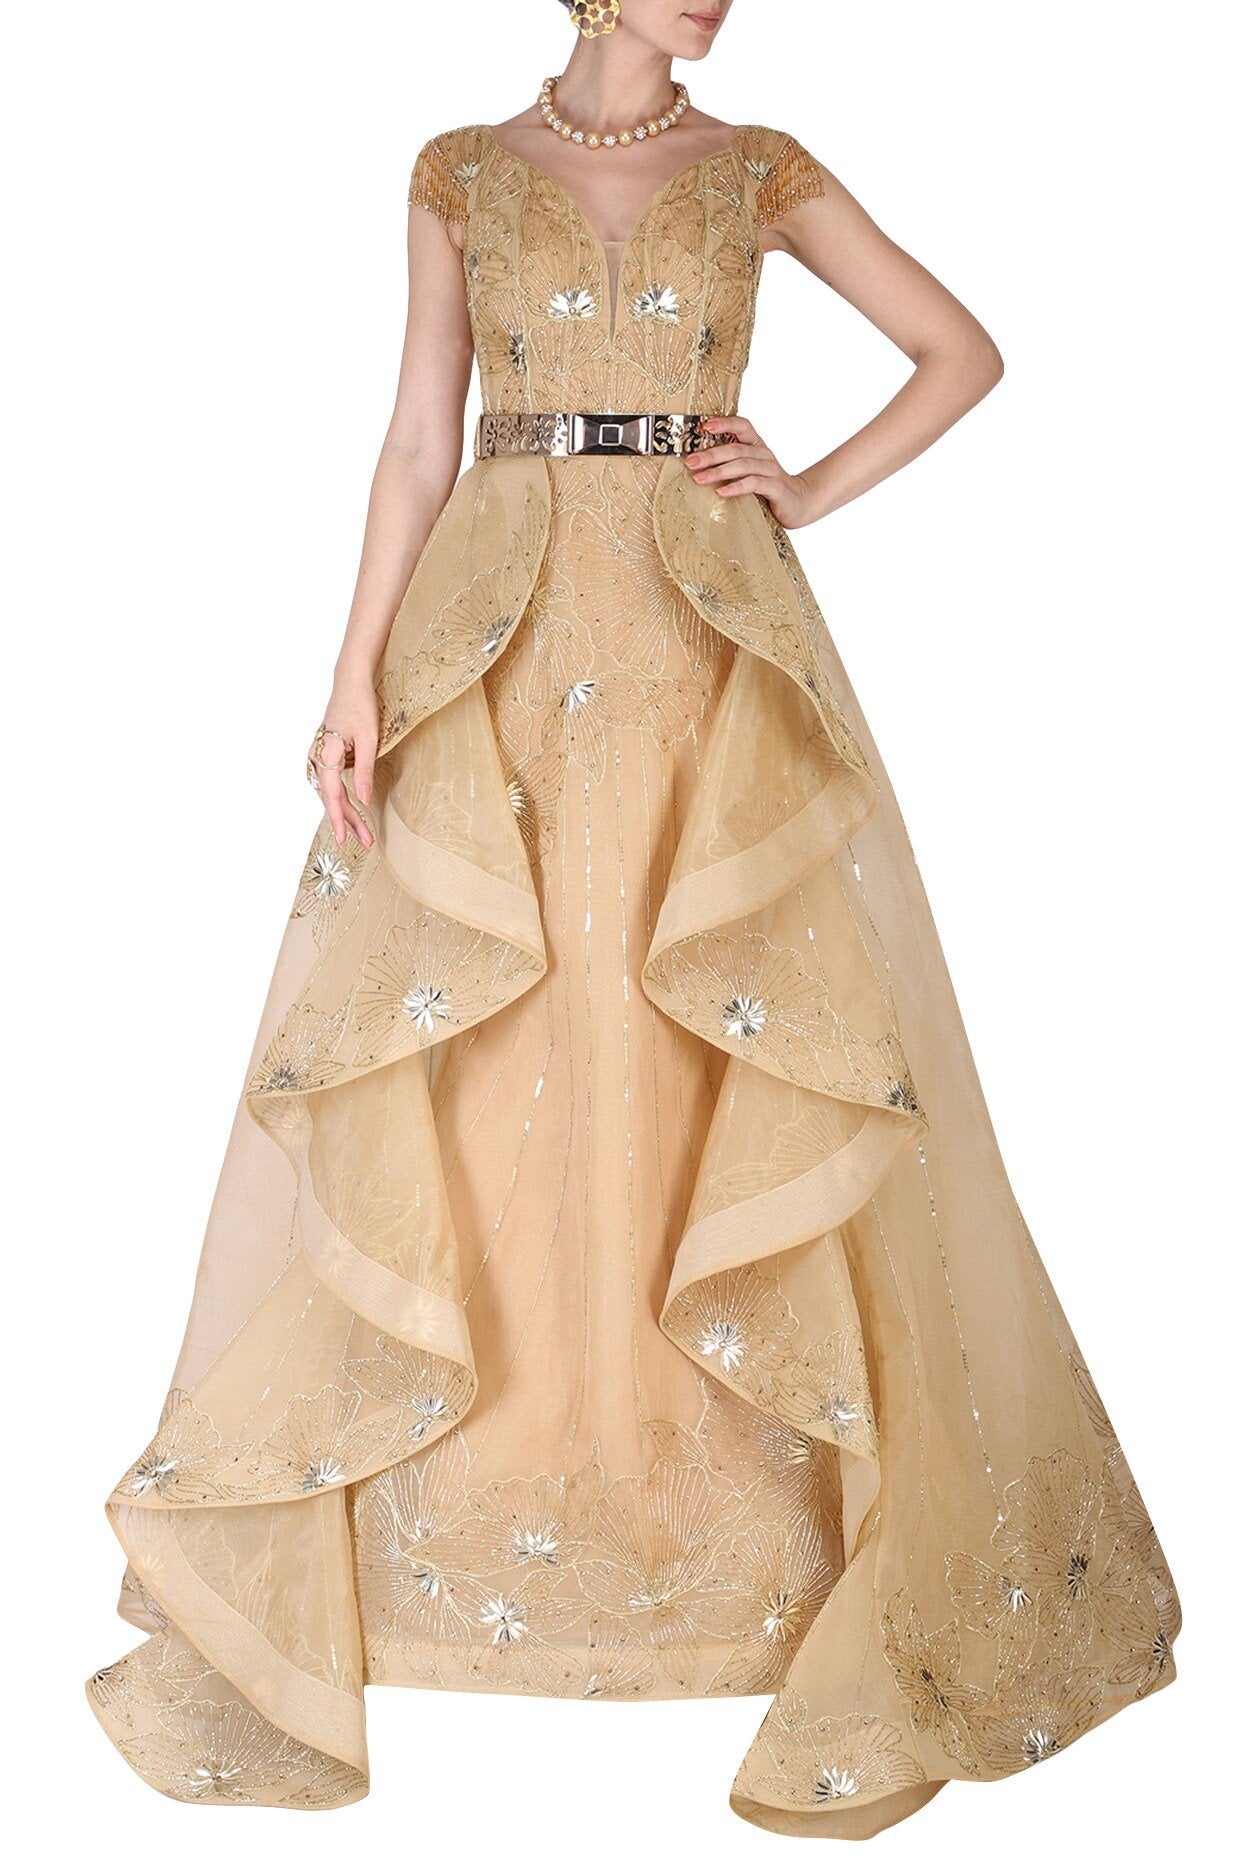 Amit GT - Golden hand embroidered ball gown 